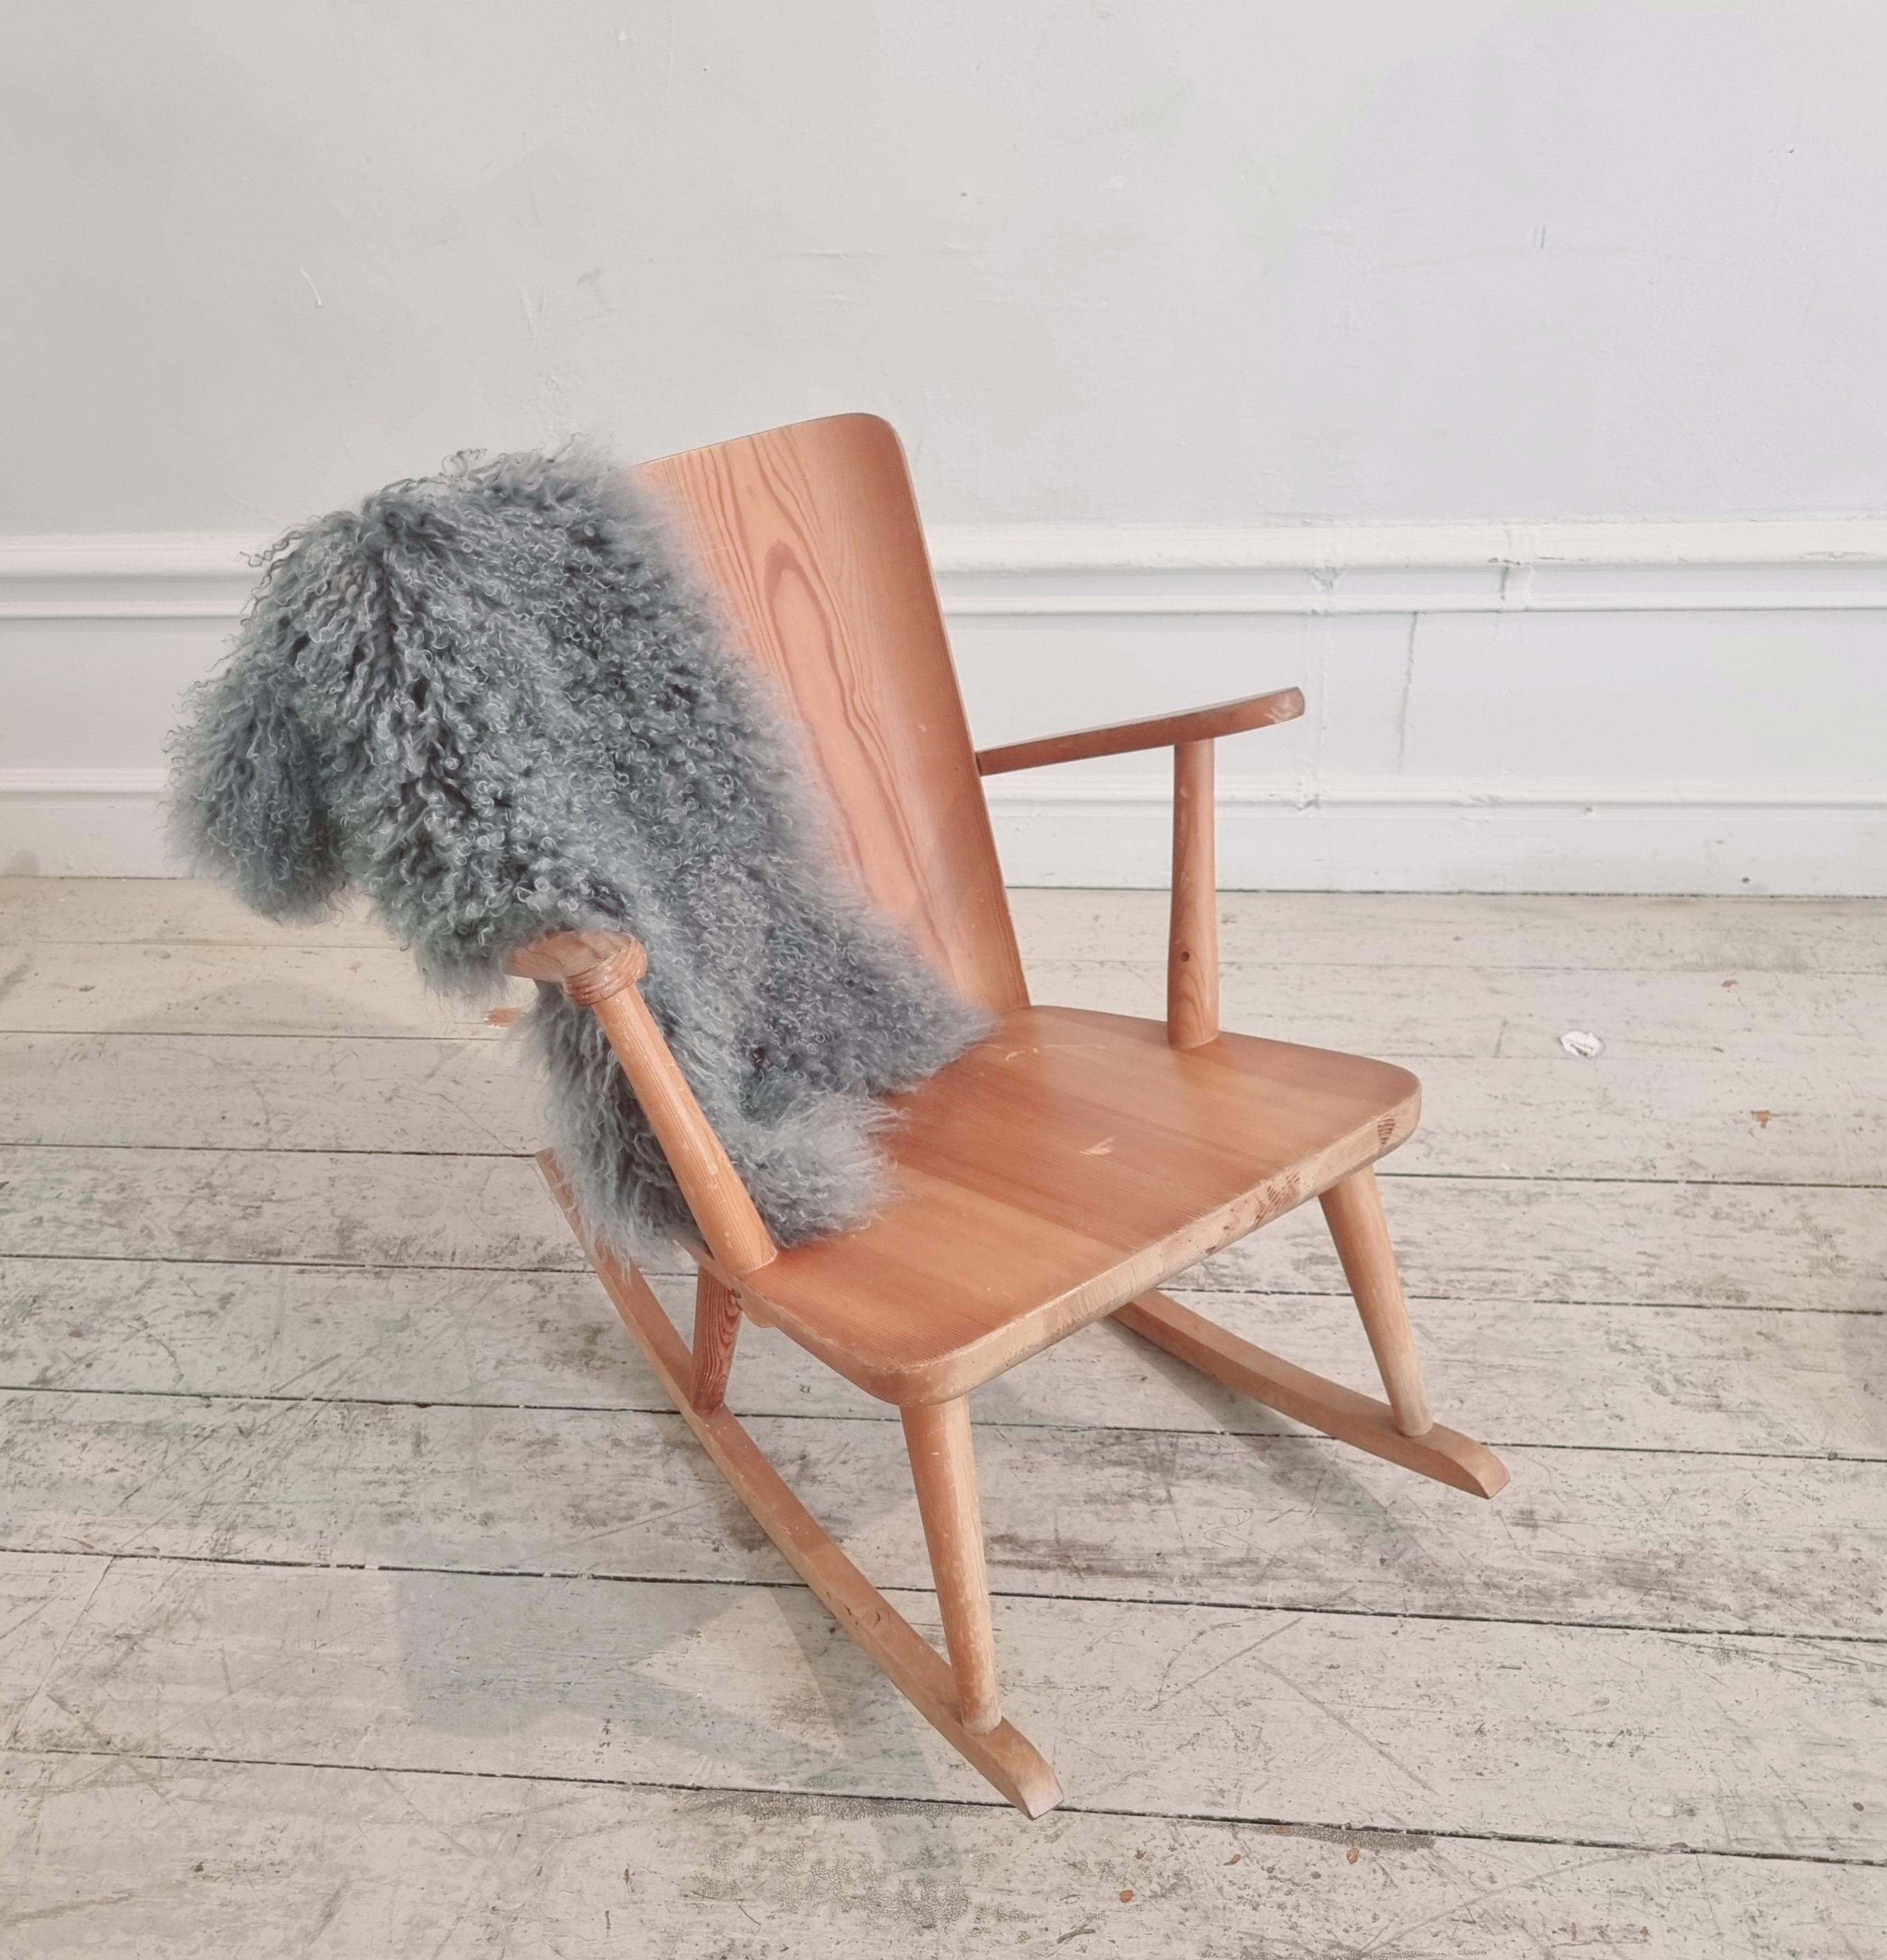 Rocking chair in pine designed by Göran Malmvall, Svensk Fur - series model 513 for Karl Andersson & Söner. Sportstugemöbel, a part of the trend of Sportstugor / cabins with focus on sport activities as skiing, built in Sweden during the